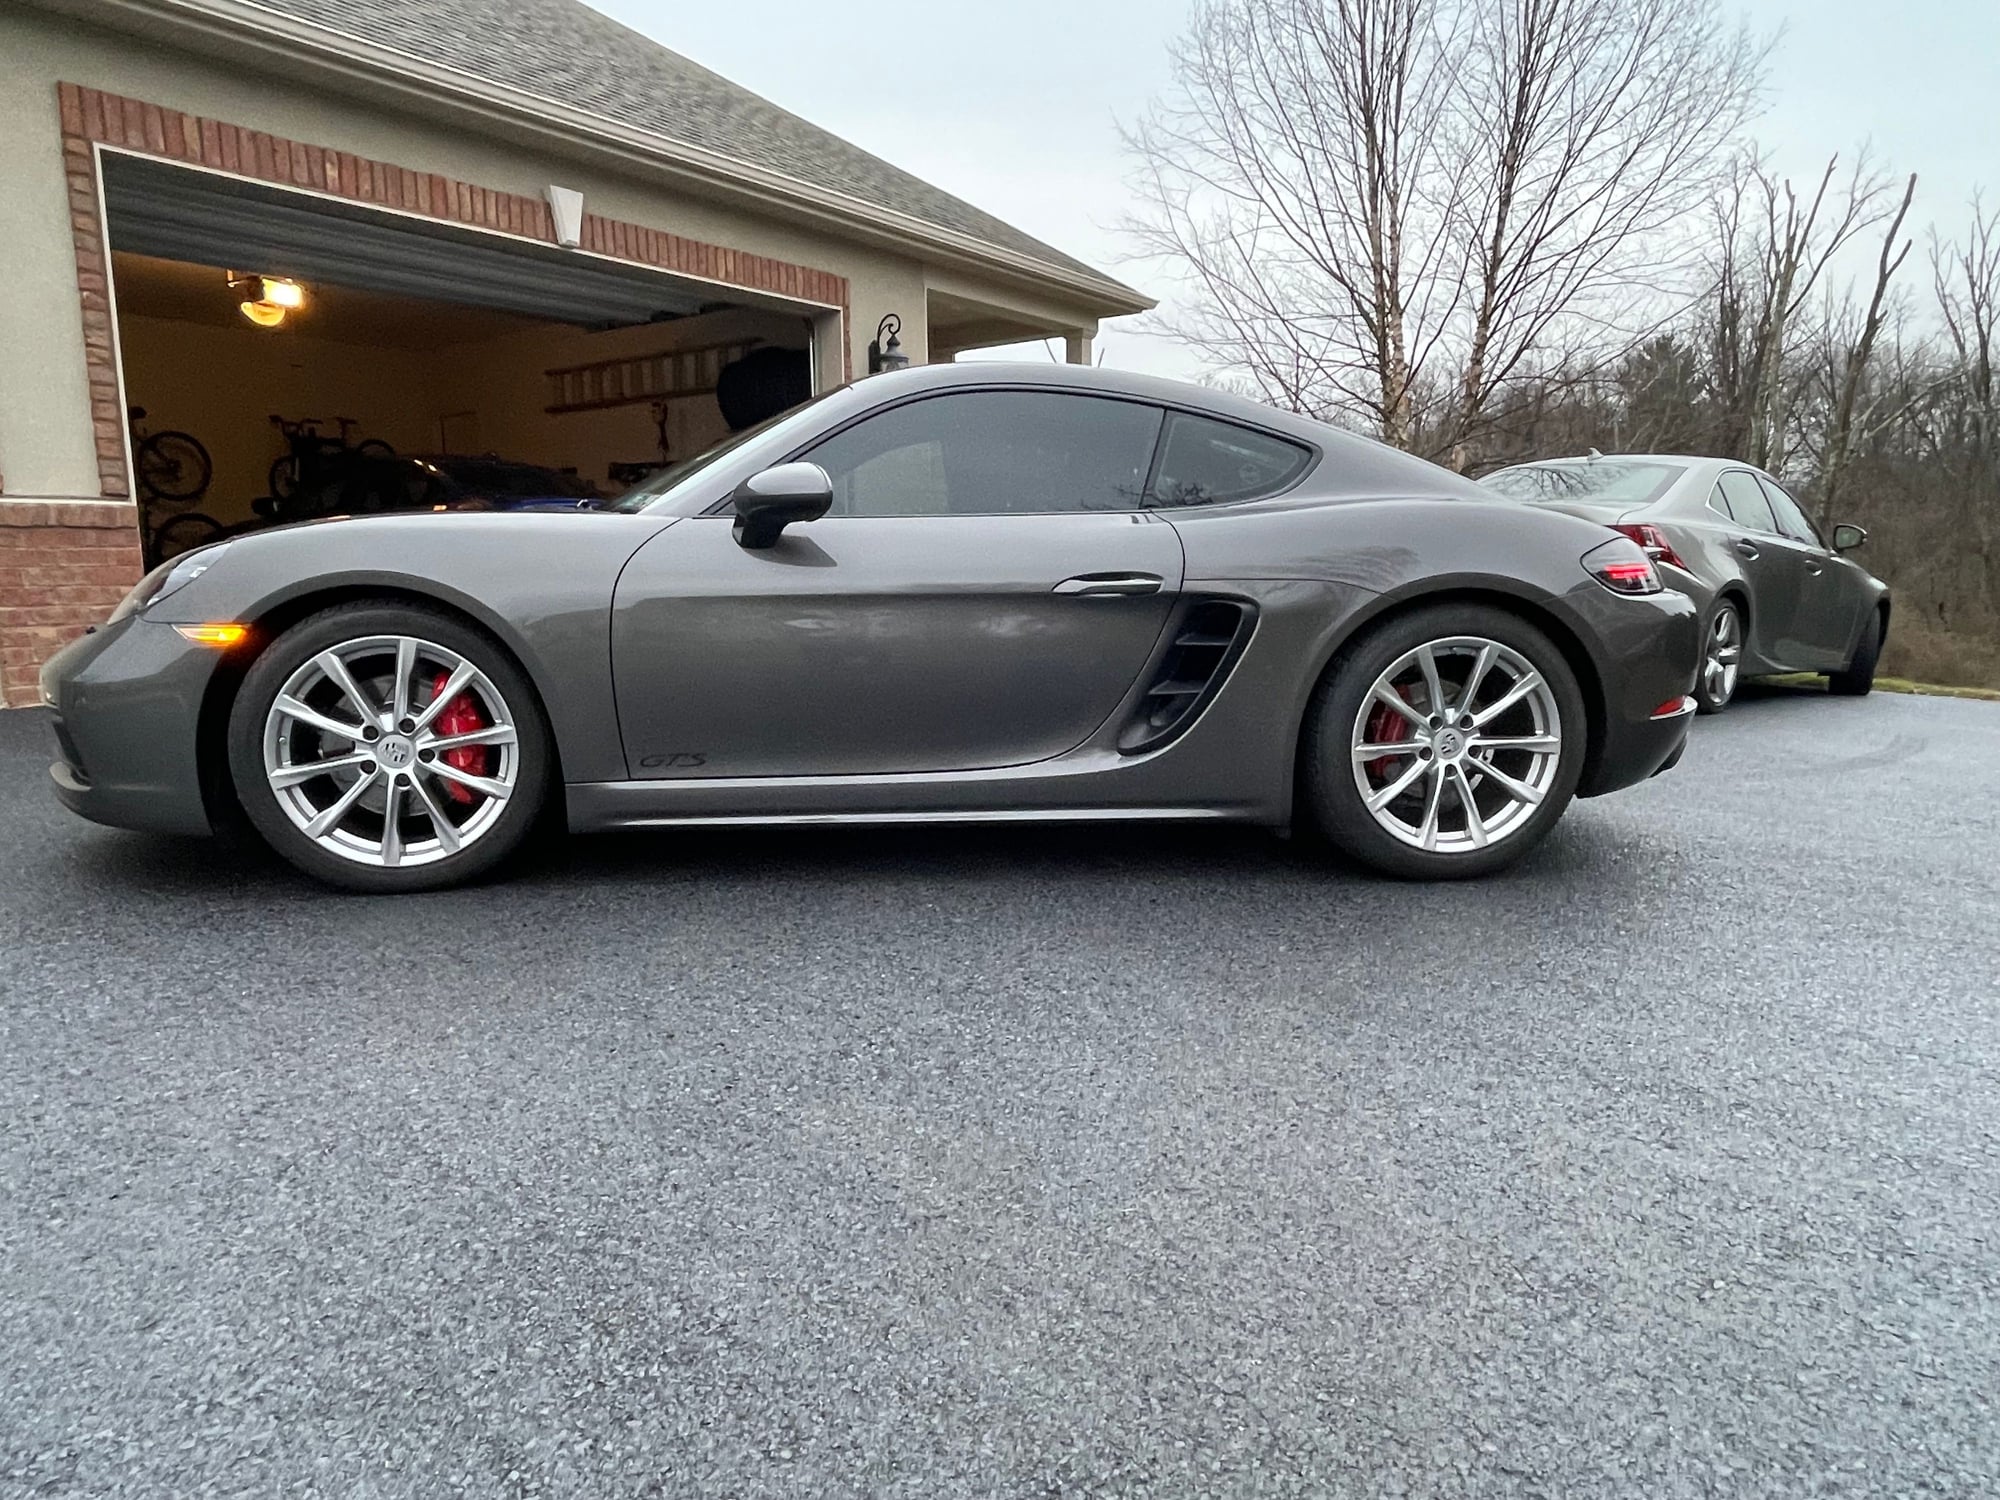 2018 Porsche 718 Cayman - 2018 Cayman GTS 2.5L - Used - VIN WP0AB2A8XJK279669 - 21,700 Miles - 4 cyl - 2WD - Automatic - Coupe - Gray - Harrisburg, PA 17112, United States